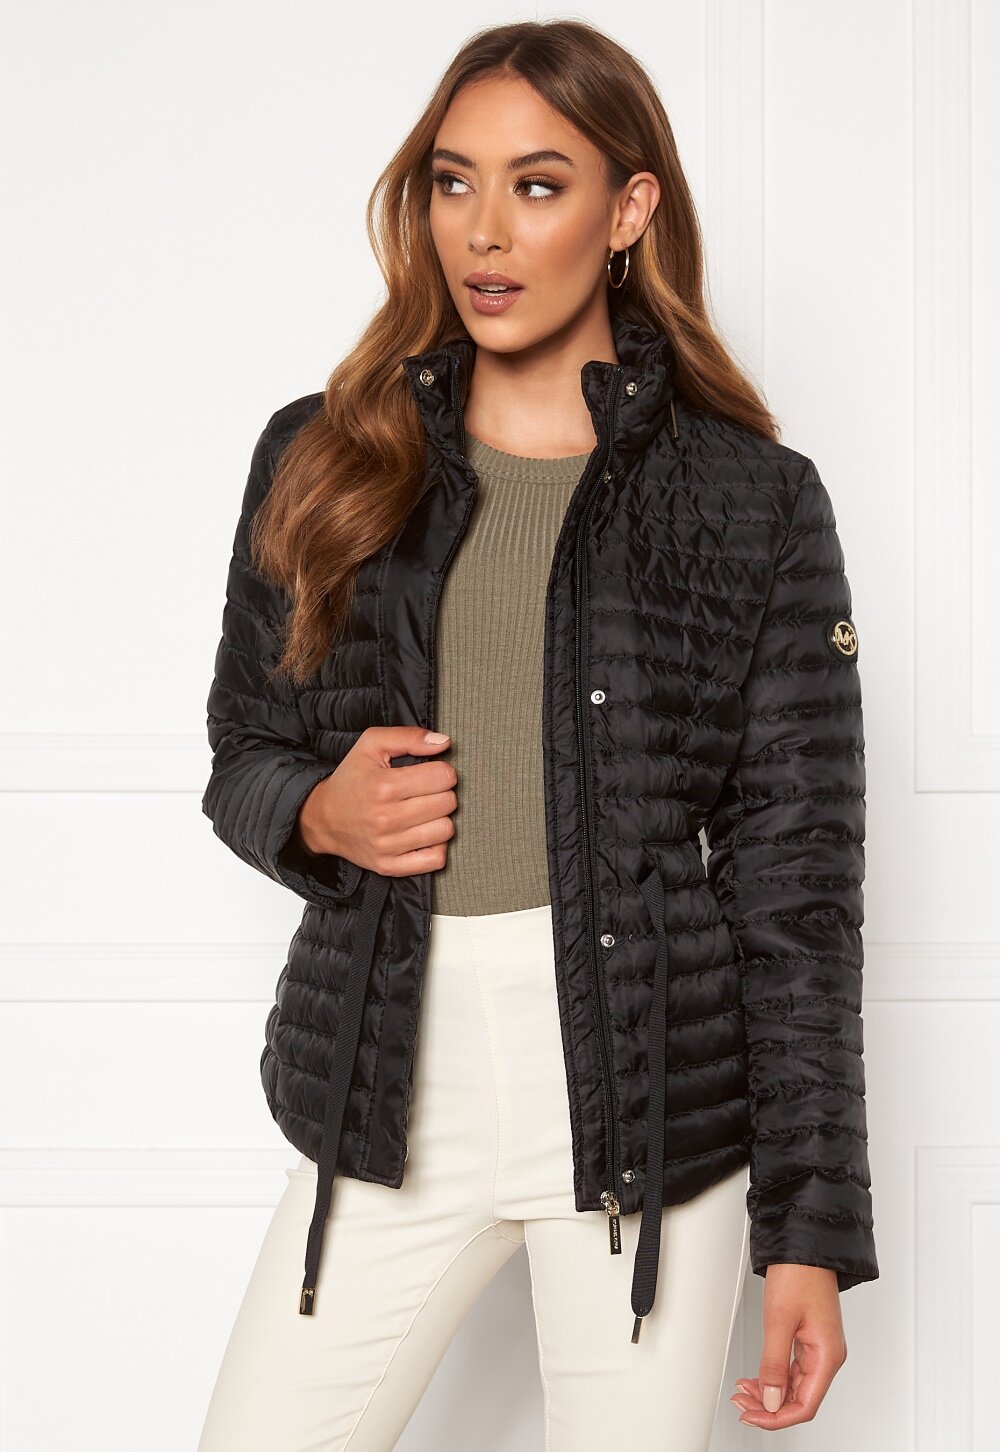 michael kors belted quilted jacket